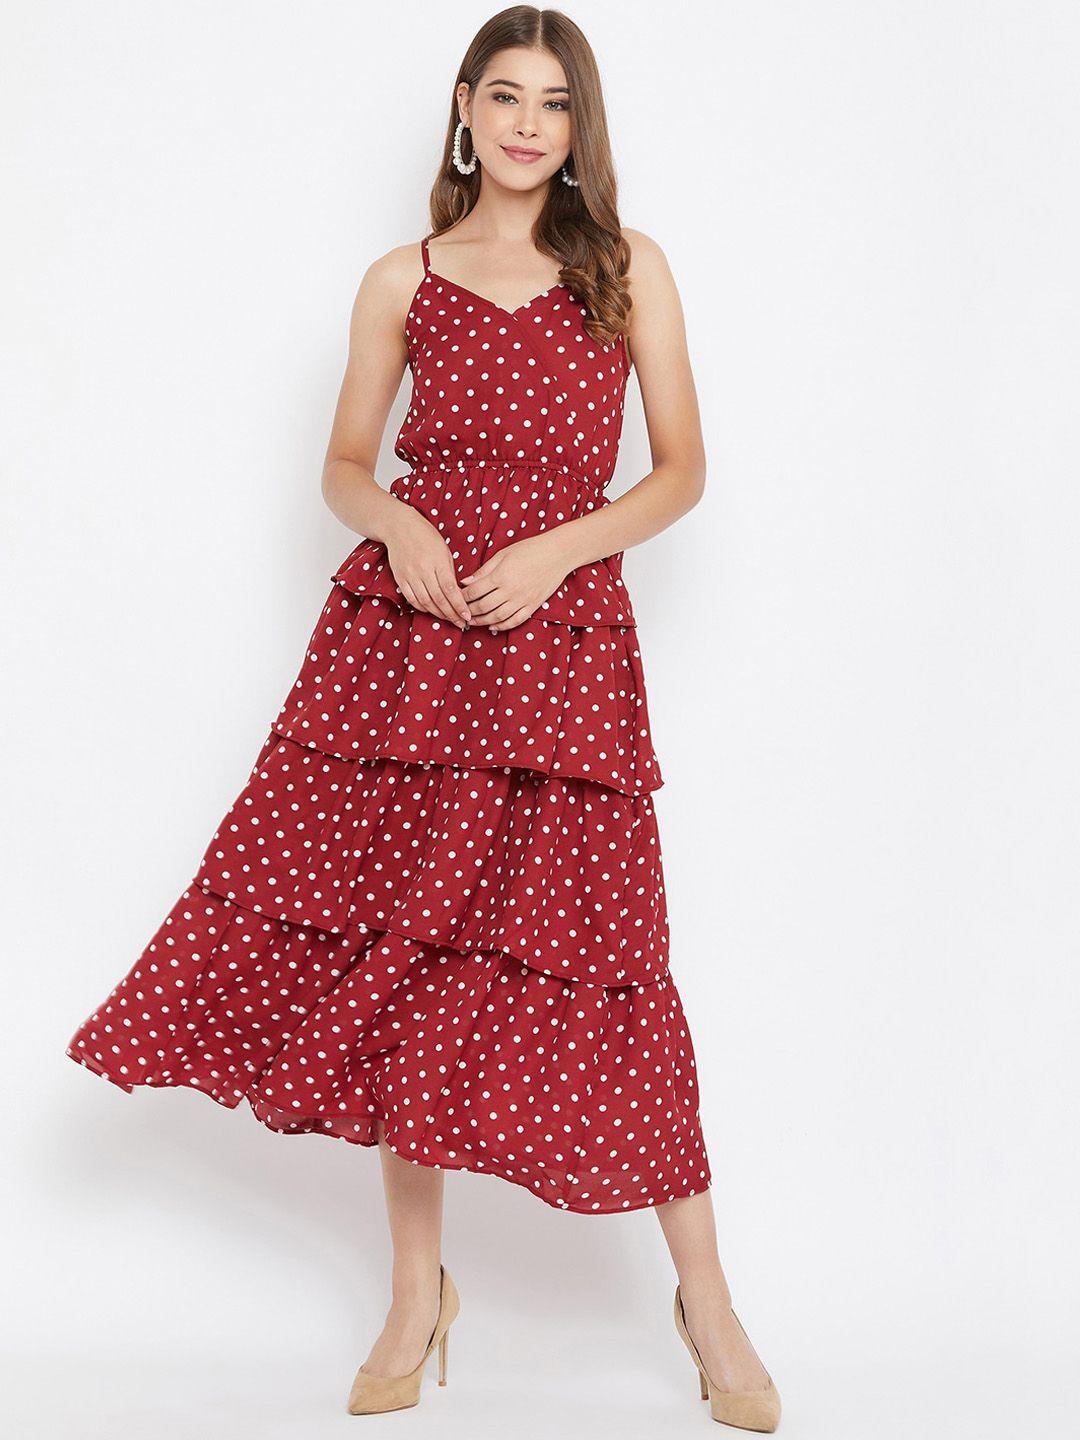 berrylush women red polka dot printed fit and flare dress